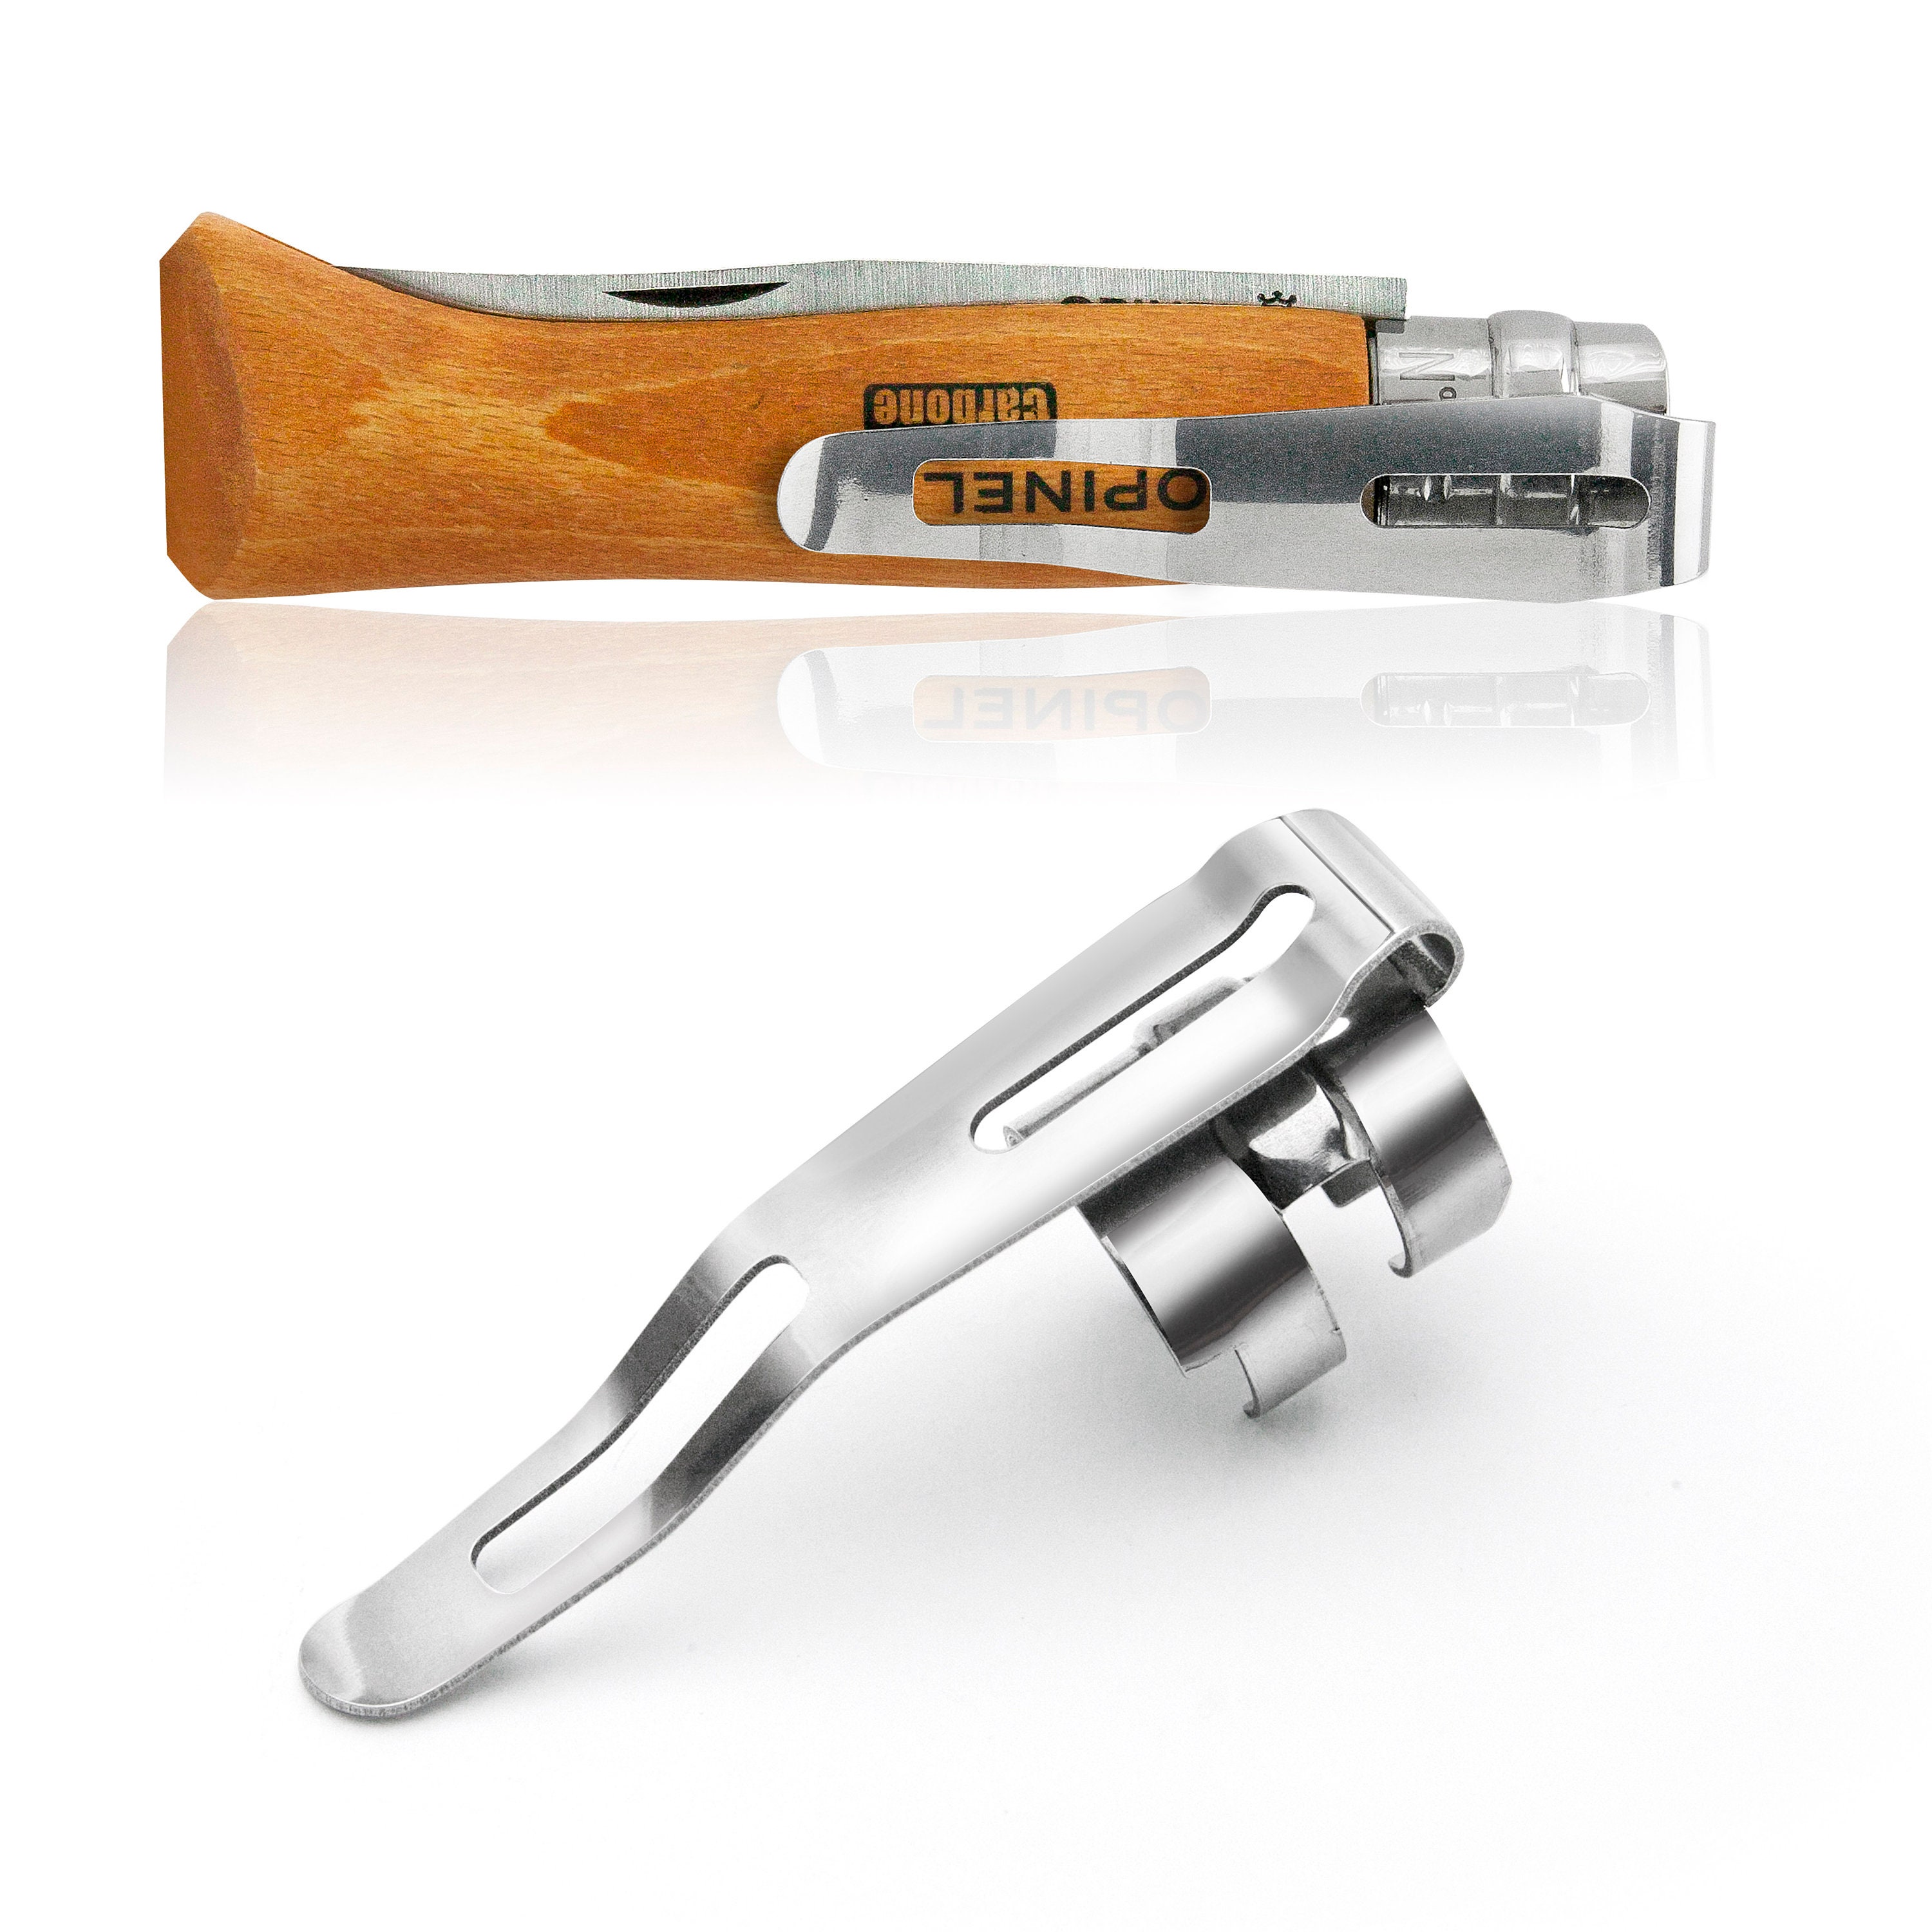 O-Clip. Removable Pocket Clip for #8 Opinel® Knife. Limited Edition